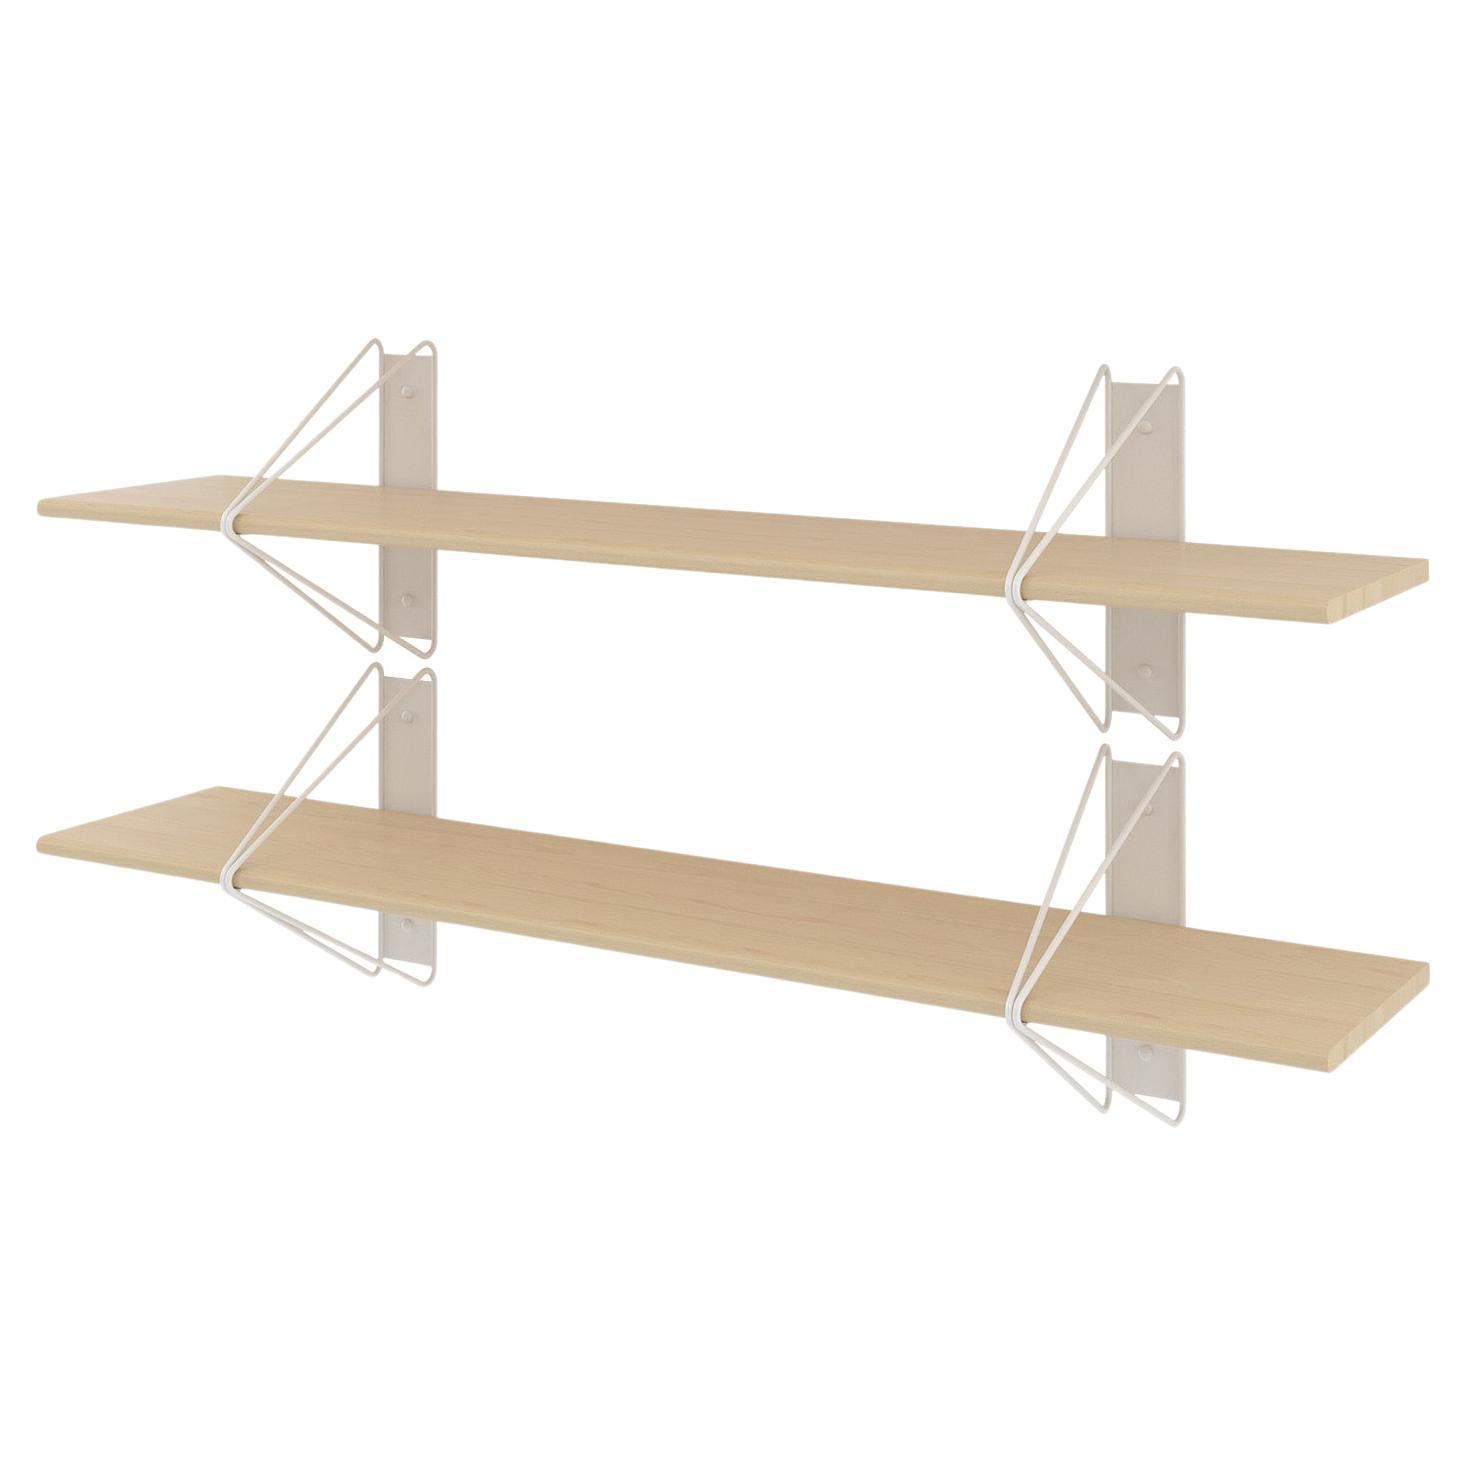 Set of 2 Strut Shelves from Souda, 52in, White and Maple, Made to Order